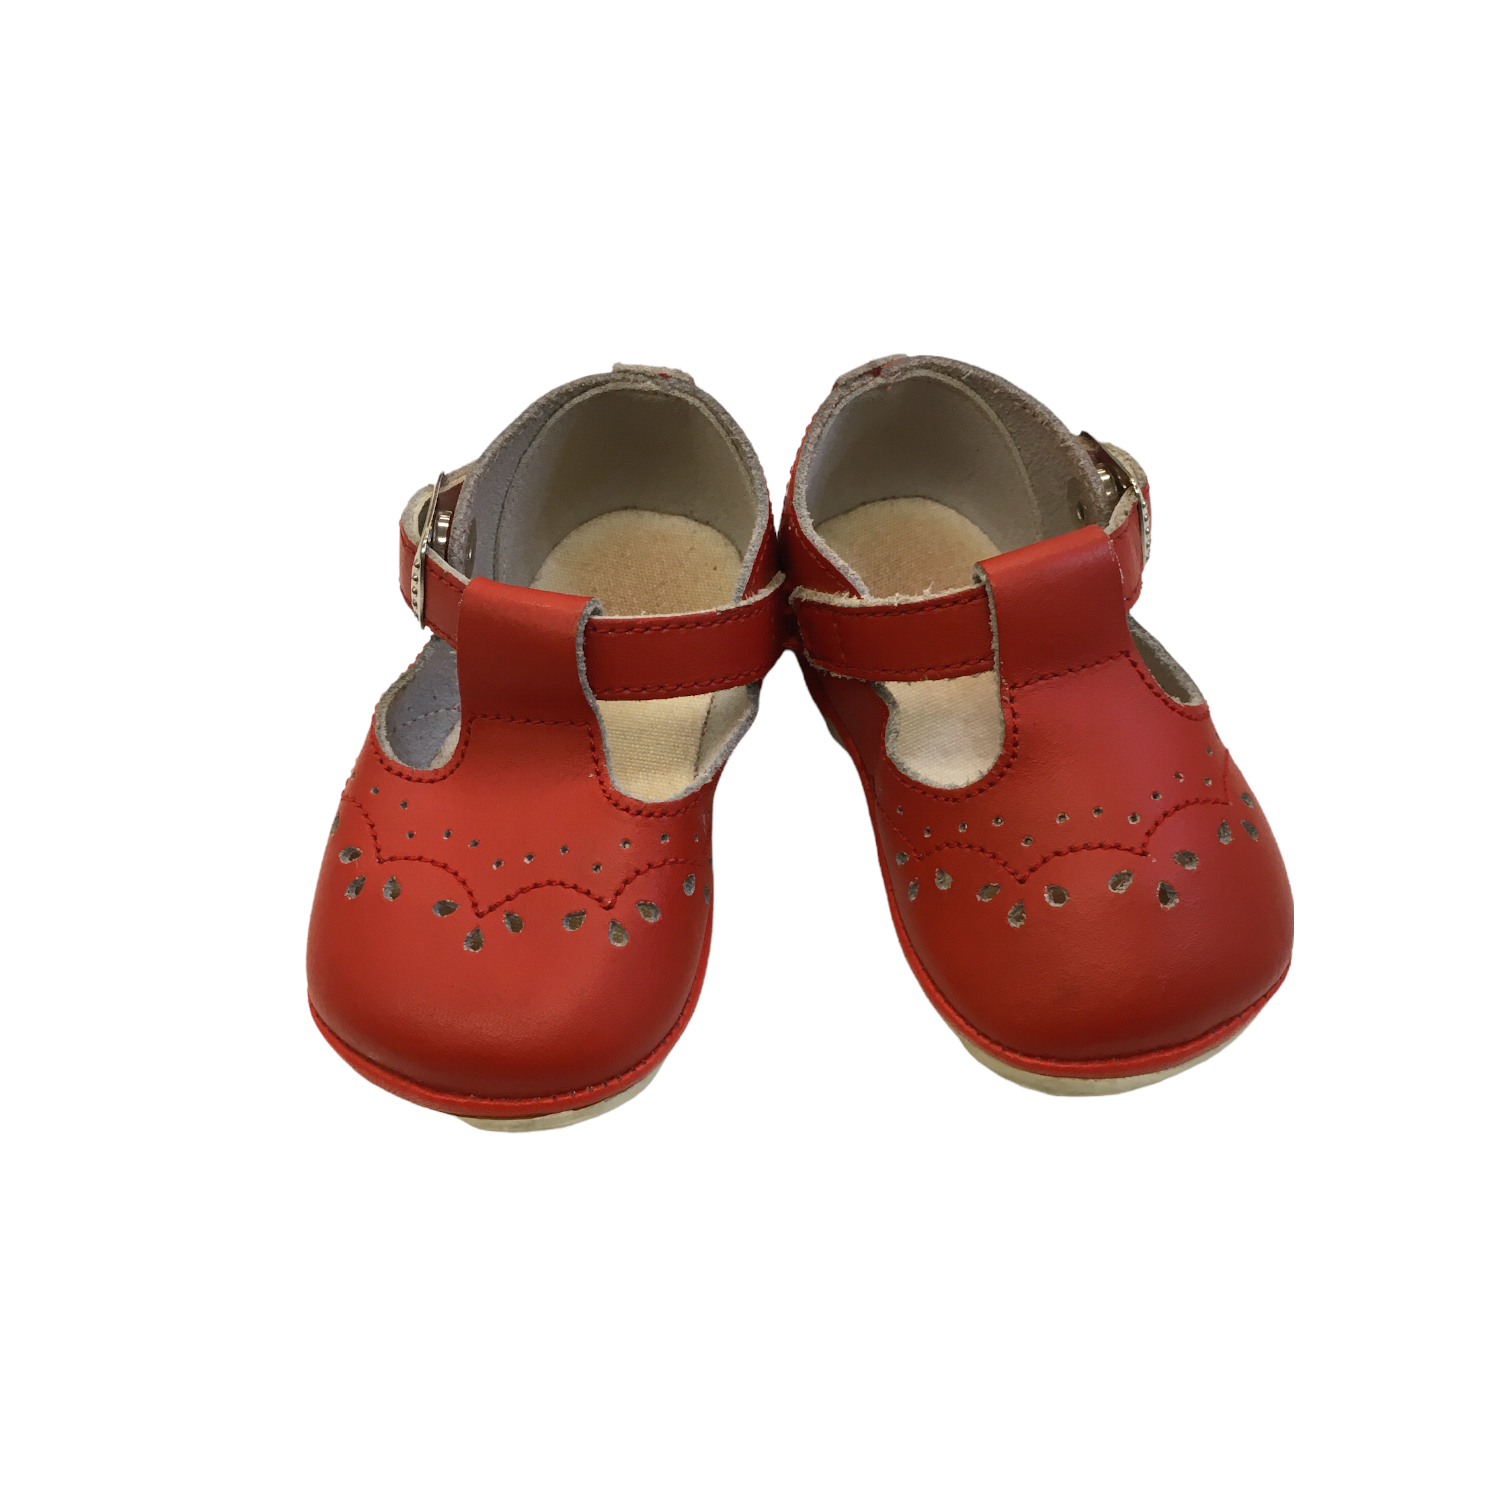 Shoes (Red), Girl, Size: 2

#resalerocks #pipsqueakresale #vancouverwa #portland #reusereducerecycle #fashiononabudget #chooseused #consignment #savemoney #shoplocal #weship #keepusopen #shoplocalonline #resale #resaleboutique #mommyandme #minime #fashion #reseller                                                                                                                                      Cross posted, items are located at #PipsqueakResaleBoutique, payments accepted: cash, paypal & credit cards. Any flaws will be described in the comments. More pictures available with link above. Local pick up available at the #VancouverMall, tax will be added (not included in price), shipping available (not included in price, *Clothing, shoes, books & DVDs for $6.99; please contact regarding shipment of toys or other larger items), item can be placed on hold with communication, message with any questions. Join Pipsqueak Resale - Online to see all the new items! Follow us on IG @pipsqueakresale & Thanks for looking! Due to the nature of consignment, any known flaws will be described; ALL SHIPPED SALES ARE FINAL. All items are currently located inside Pipsqueak Resale Boutique as a store front items purchased on location before items are prepared for shipment will be refunded.